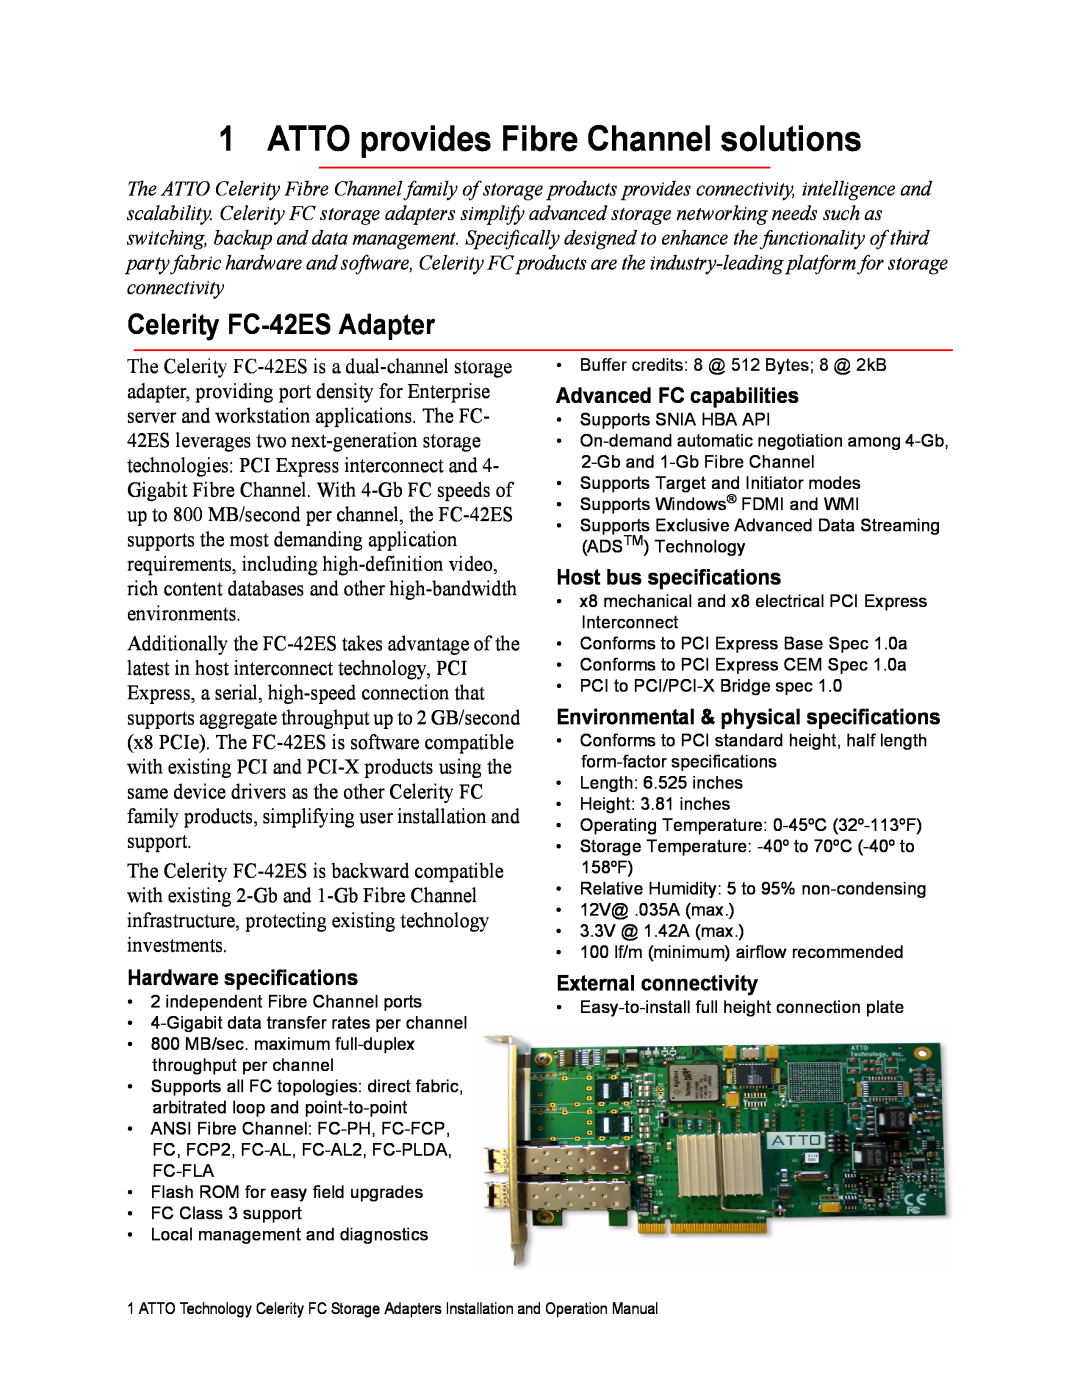 ATTO Technology FC-41XS, FC-42XS ATTO provides Fibre Channel solutions, Celerity FC-42ES Adapter, Hardware specifications 